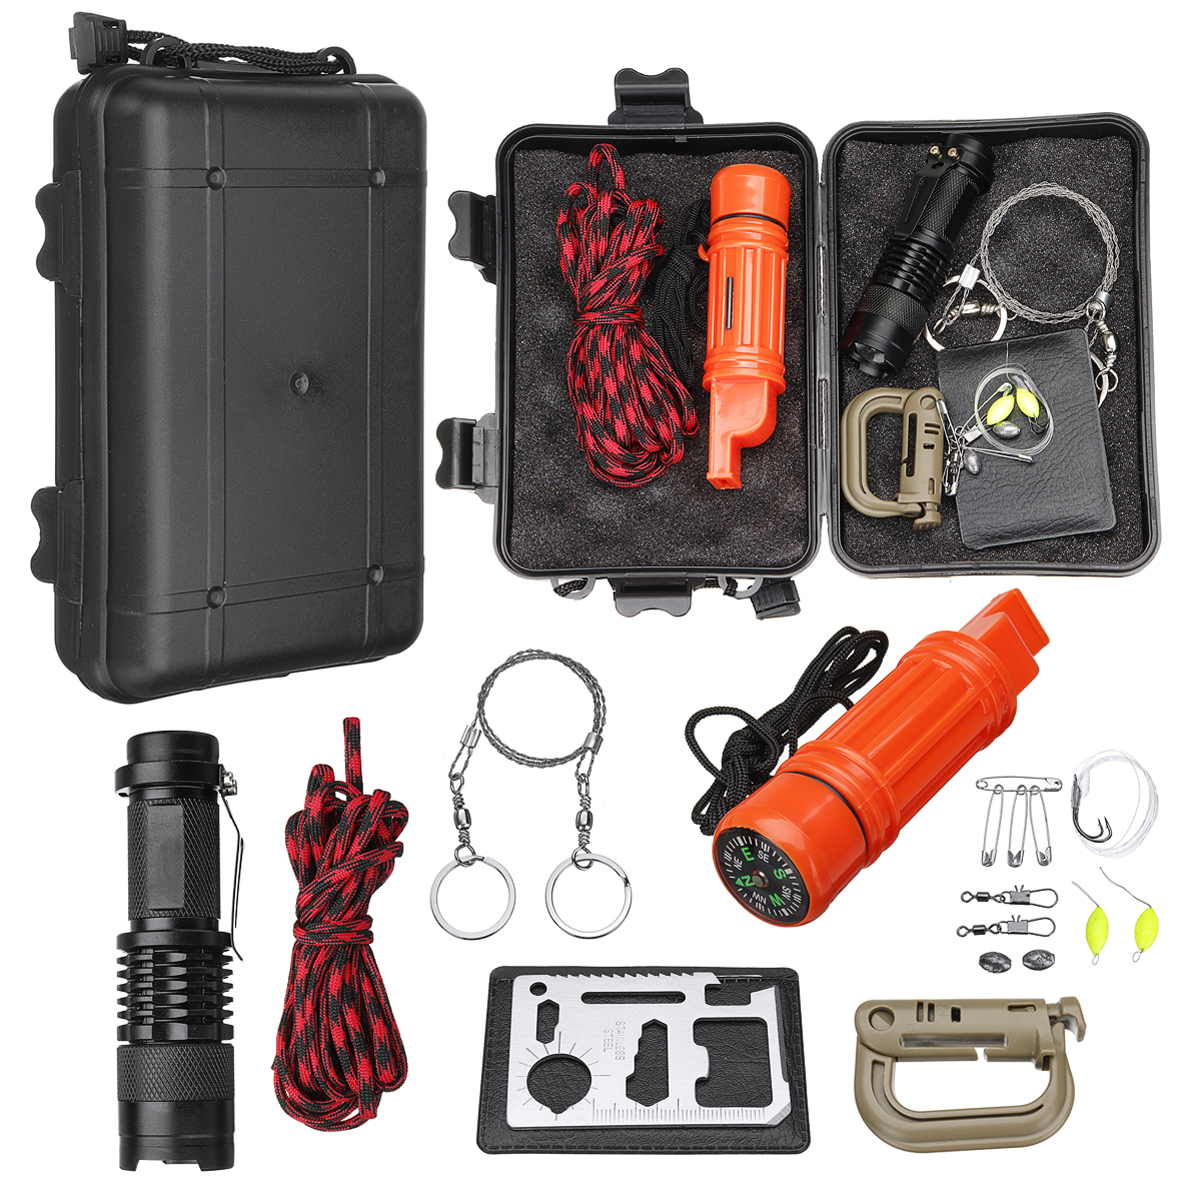 

20 In 1 SOS Emergency Survival Gear Kit Portable Multi Wilderness Camping Hunting Fishing Hiking Traveling Survival Tools Set